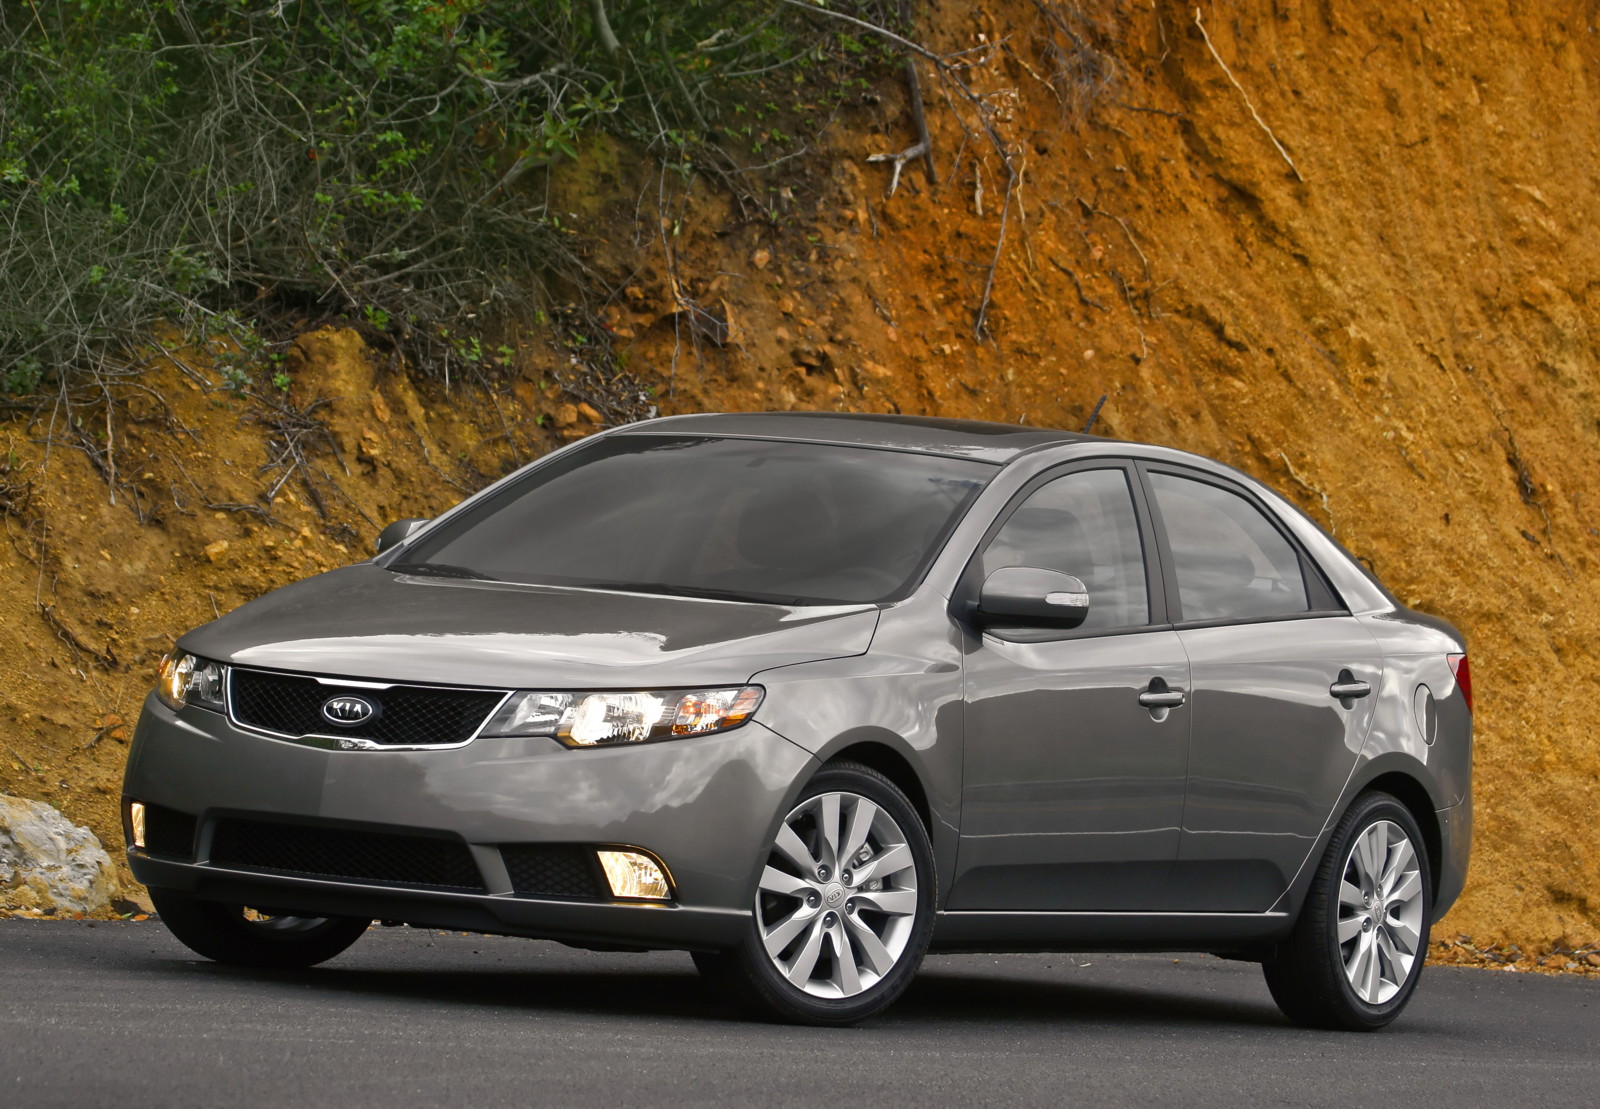 2010 Kia Forte Review Ratings Specs Prices And Photos